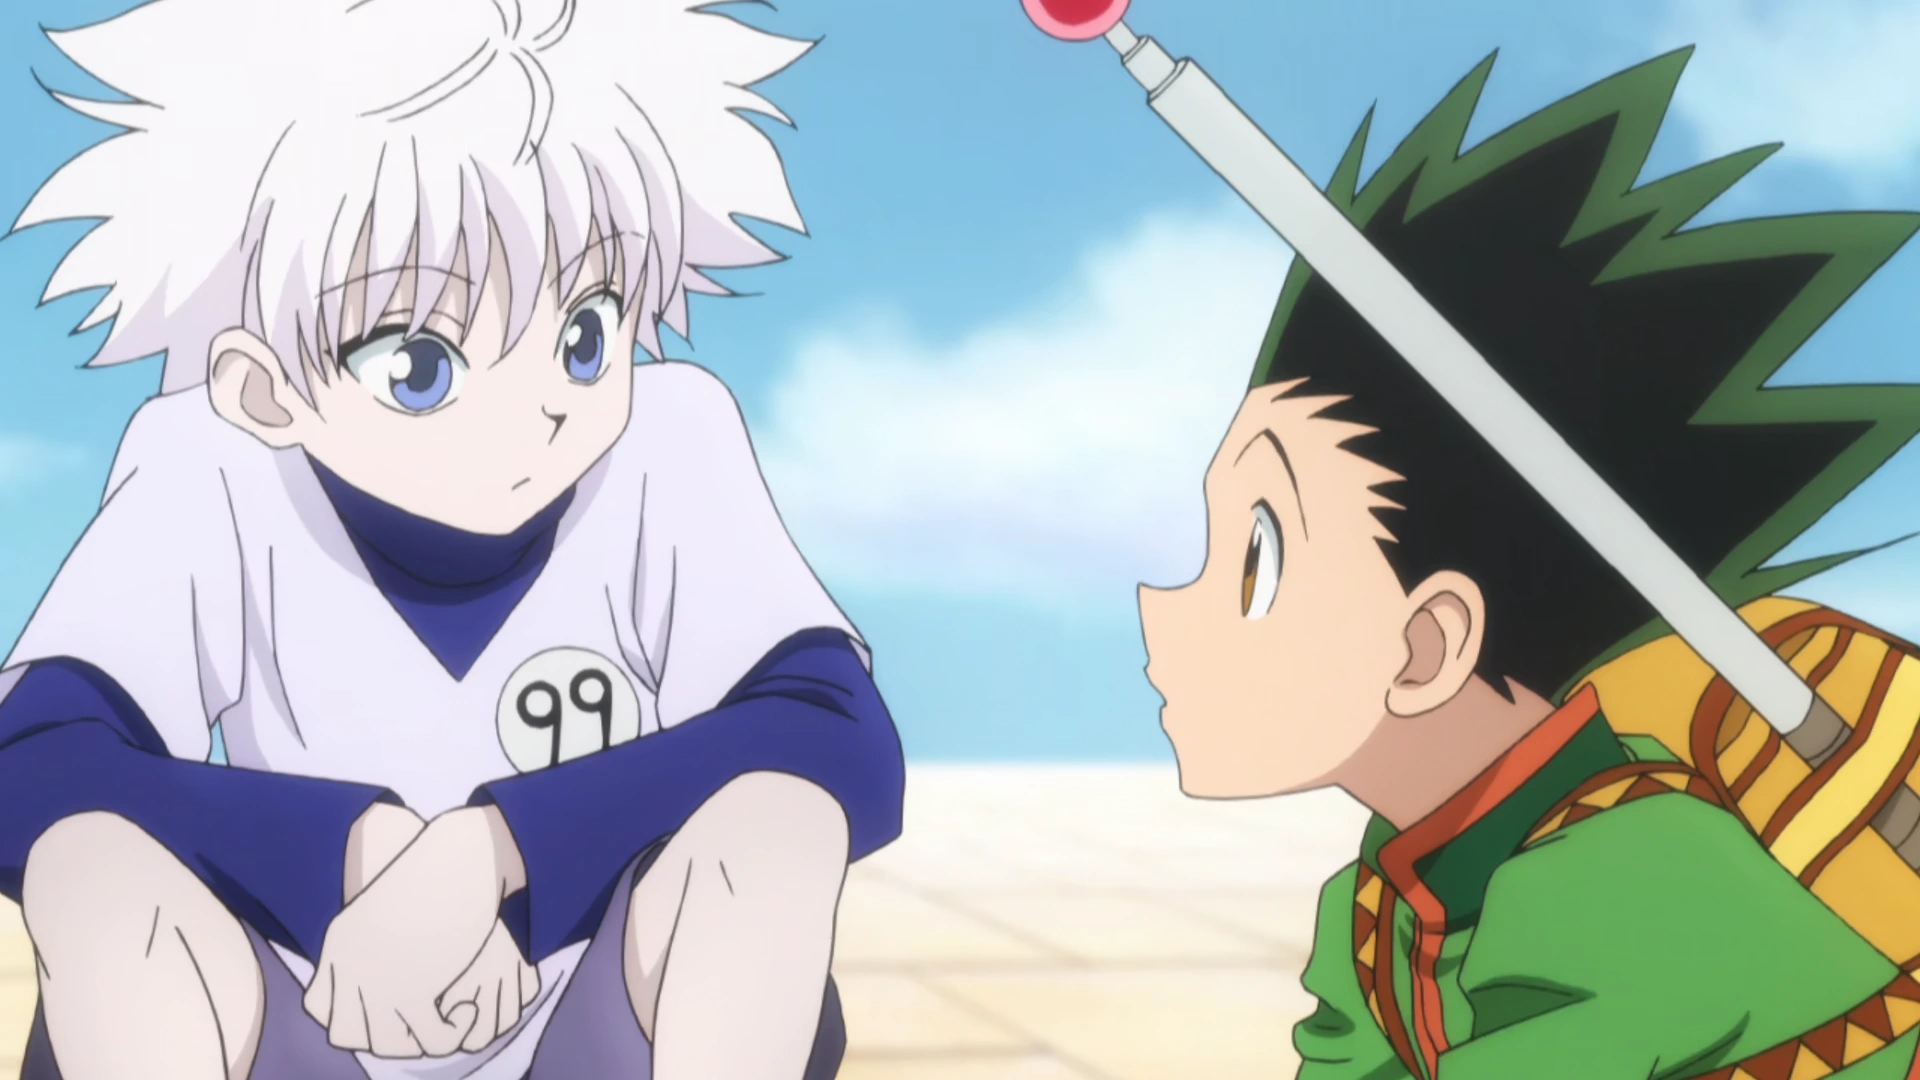 What are the notable differences between Hunter x Hunter in 1999 vs 2011? -  Anime & Manga Stack Exchange